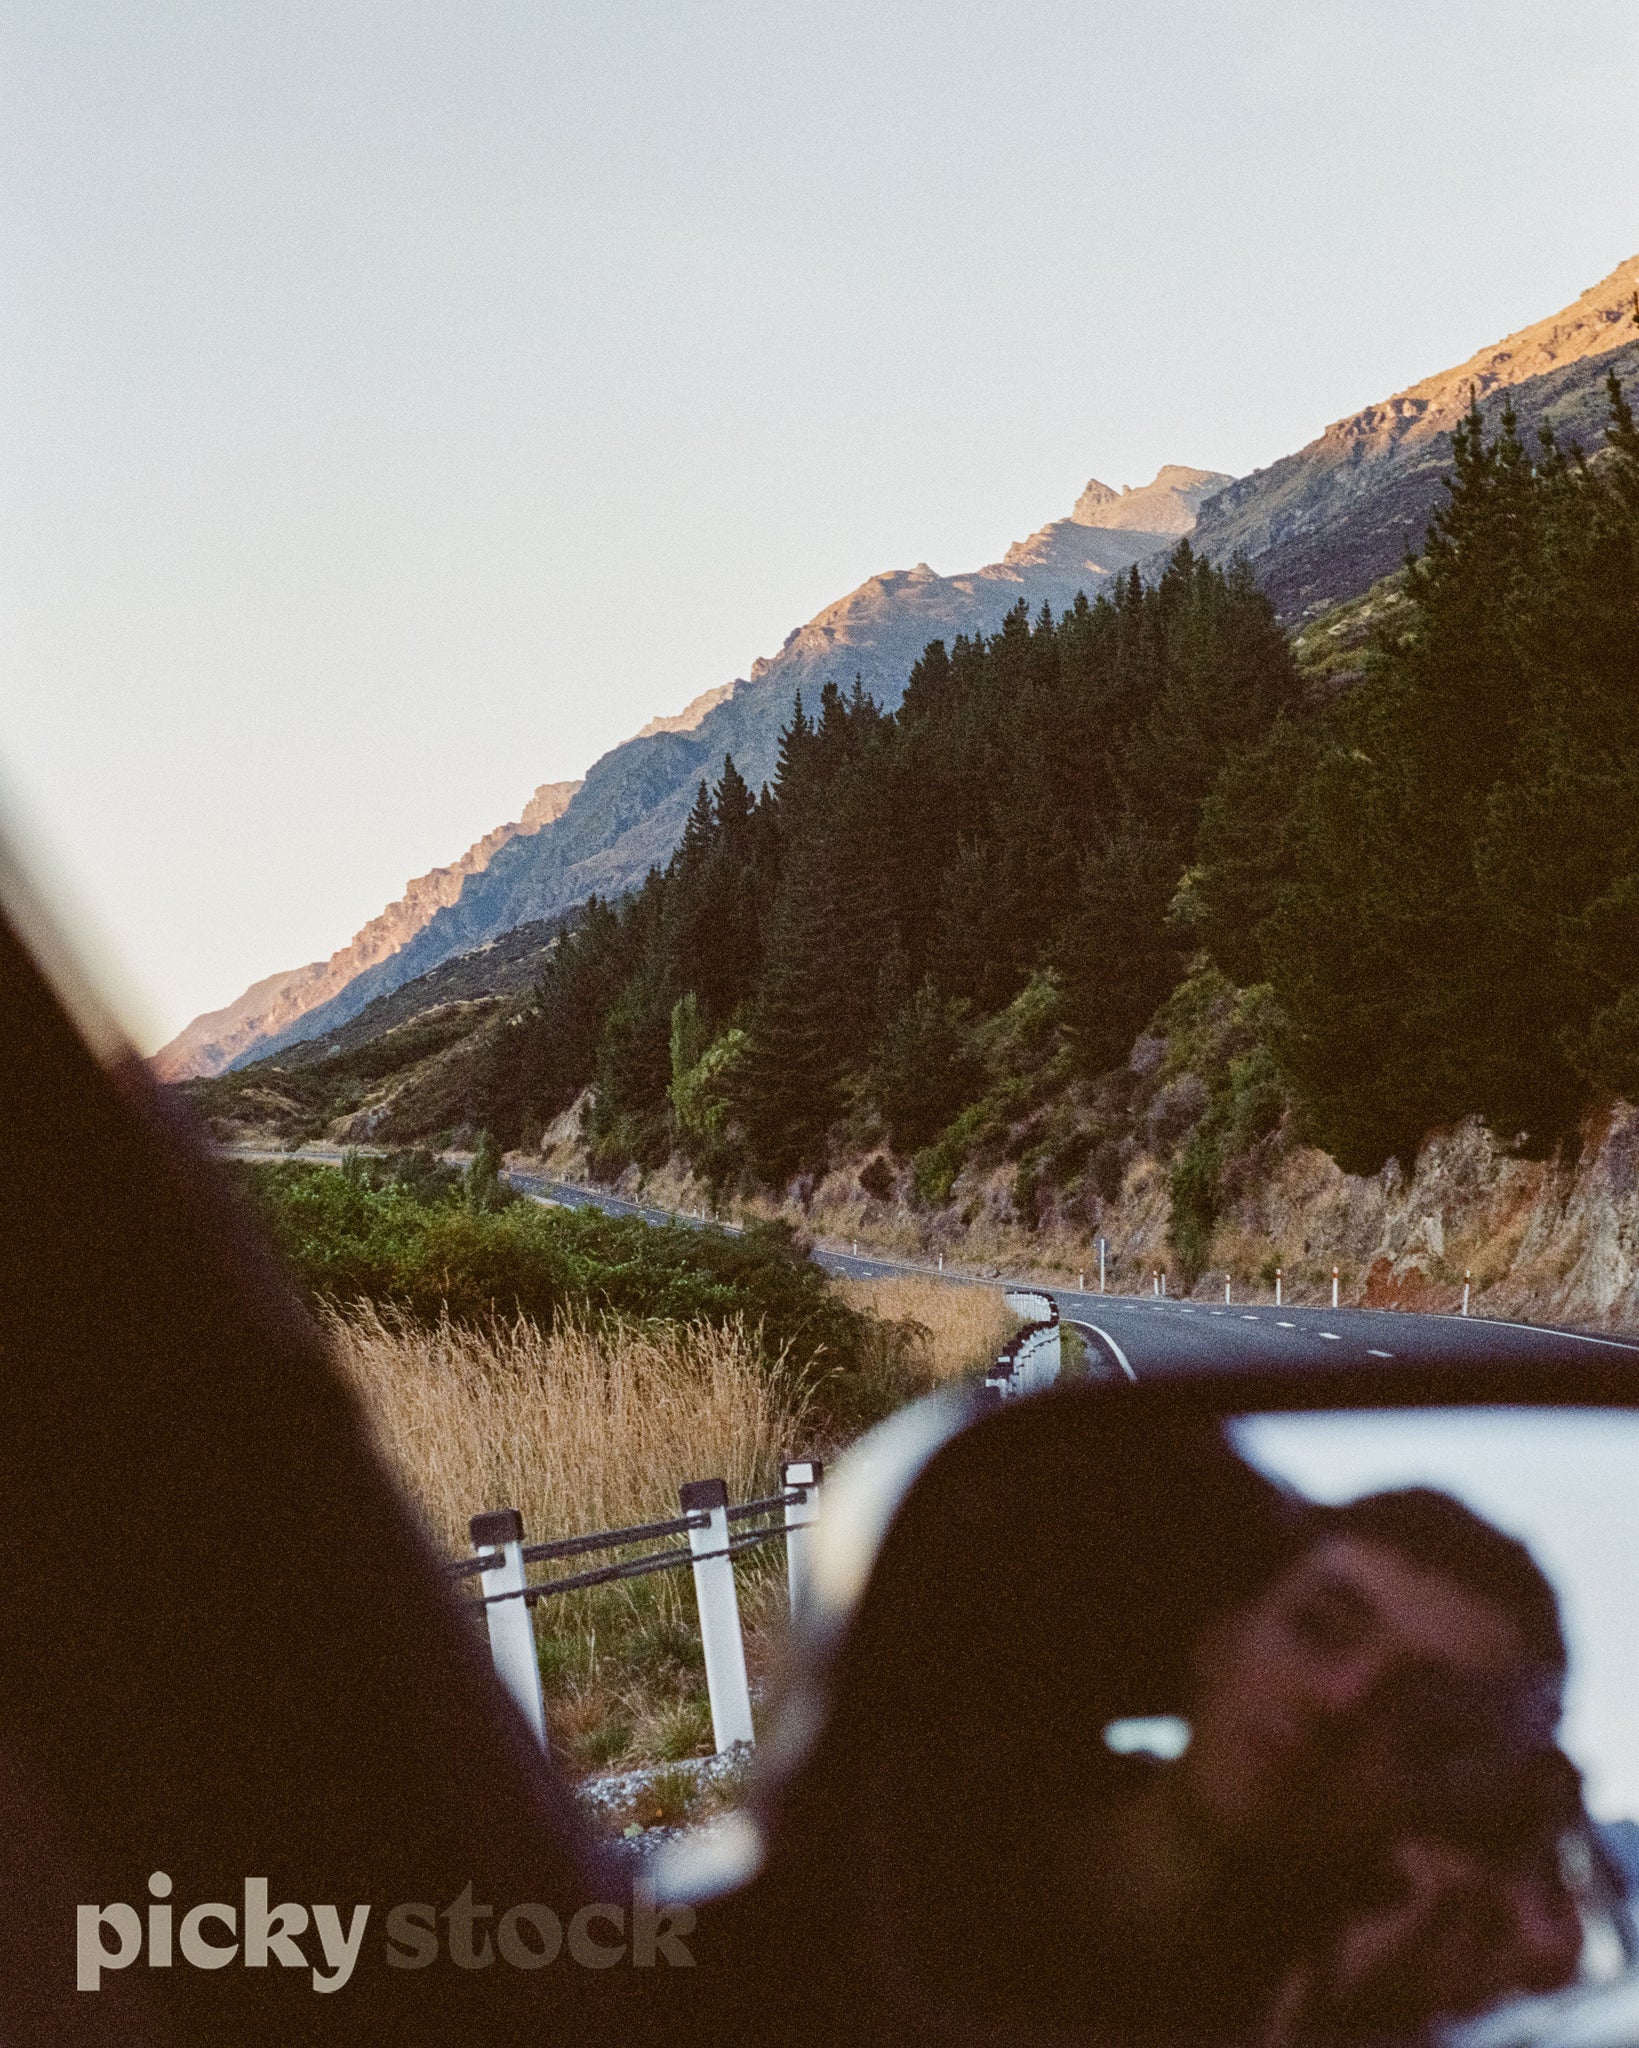 Man holding a camera, reflection of camera and face. Brown hair, grainy and soft focus. Car is driving on a rural road close to the mountain range. Green pine trees and mountain cliffs in the background. Road is well sealed with a barrier on each side. 